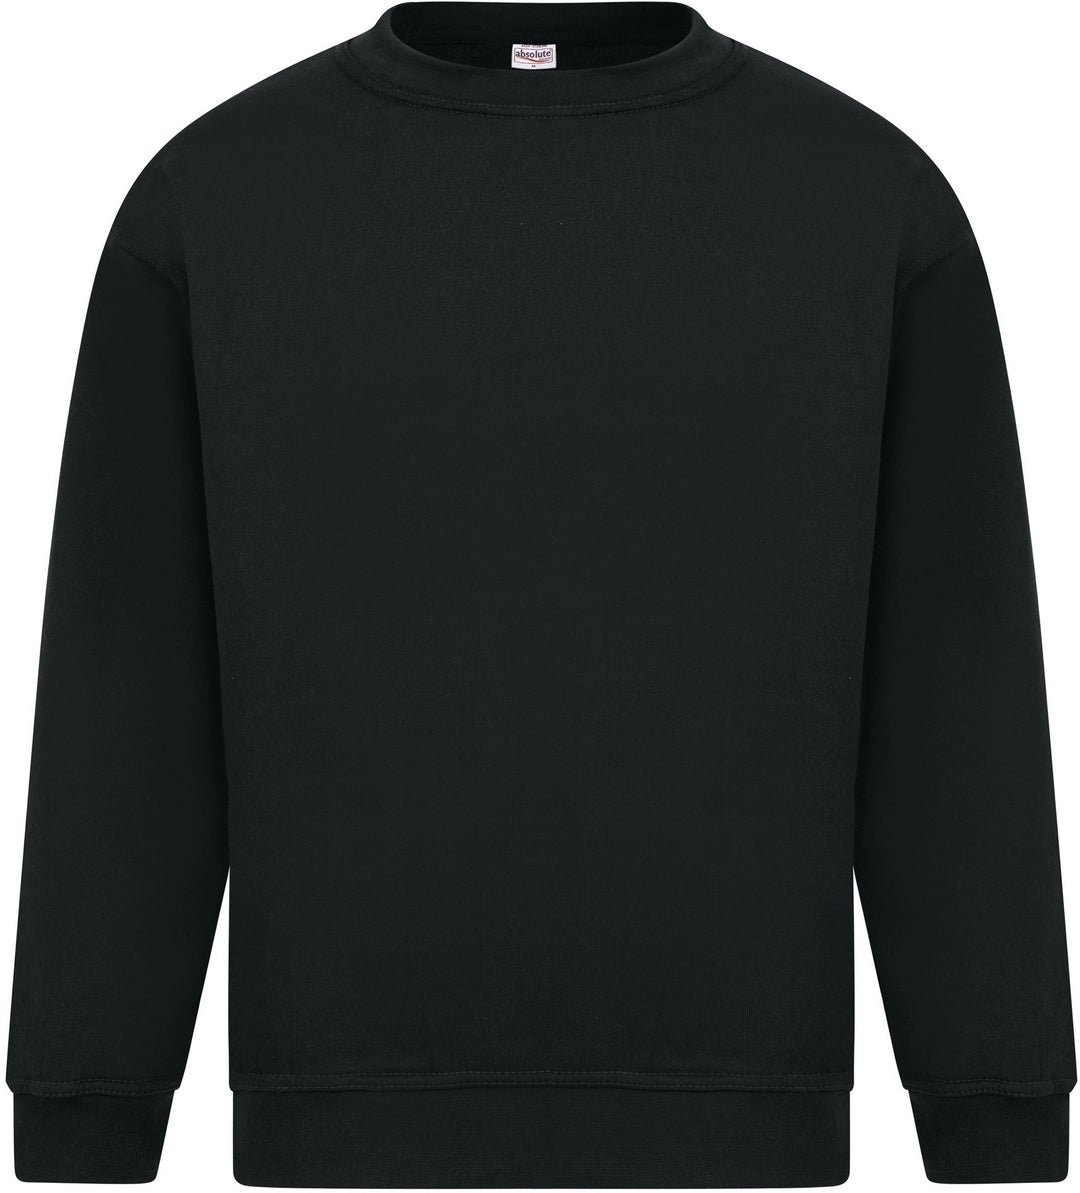 Absolute Apparel AA24 Adult Sterling Crew Neck Sweatshirt - COOZO